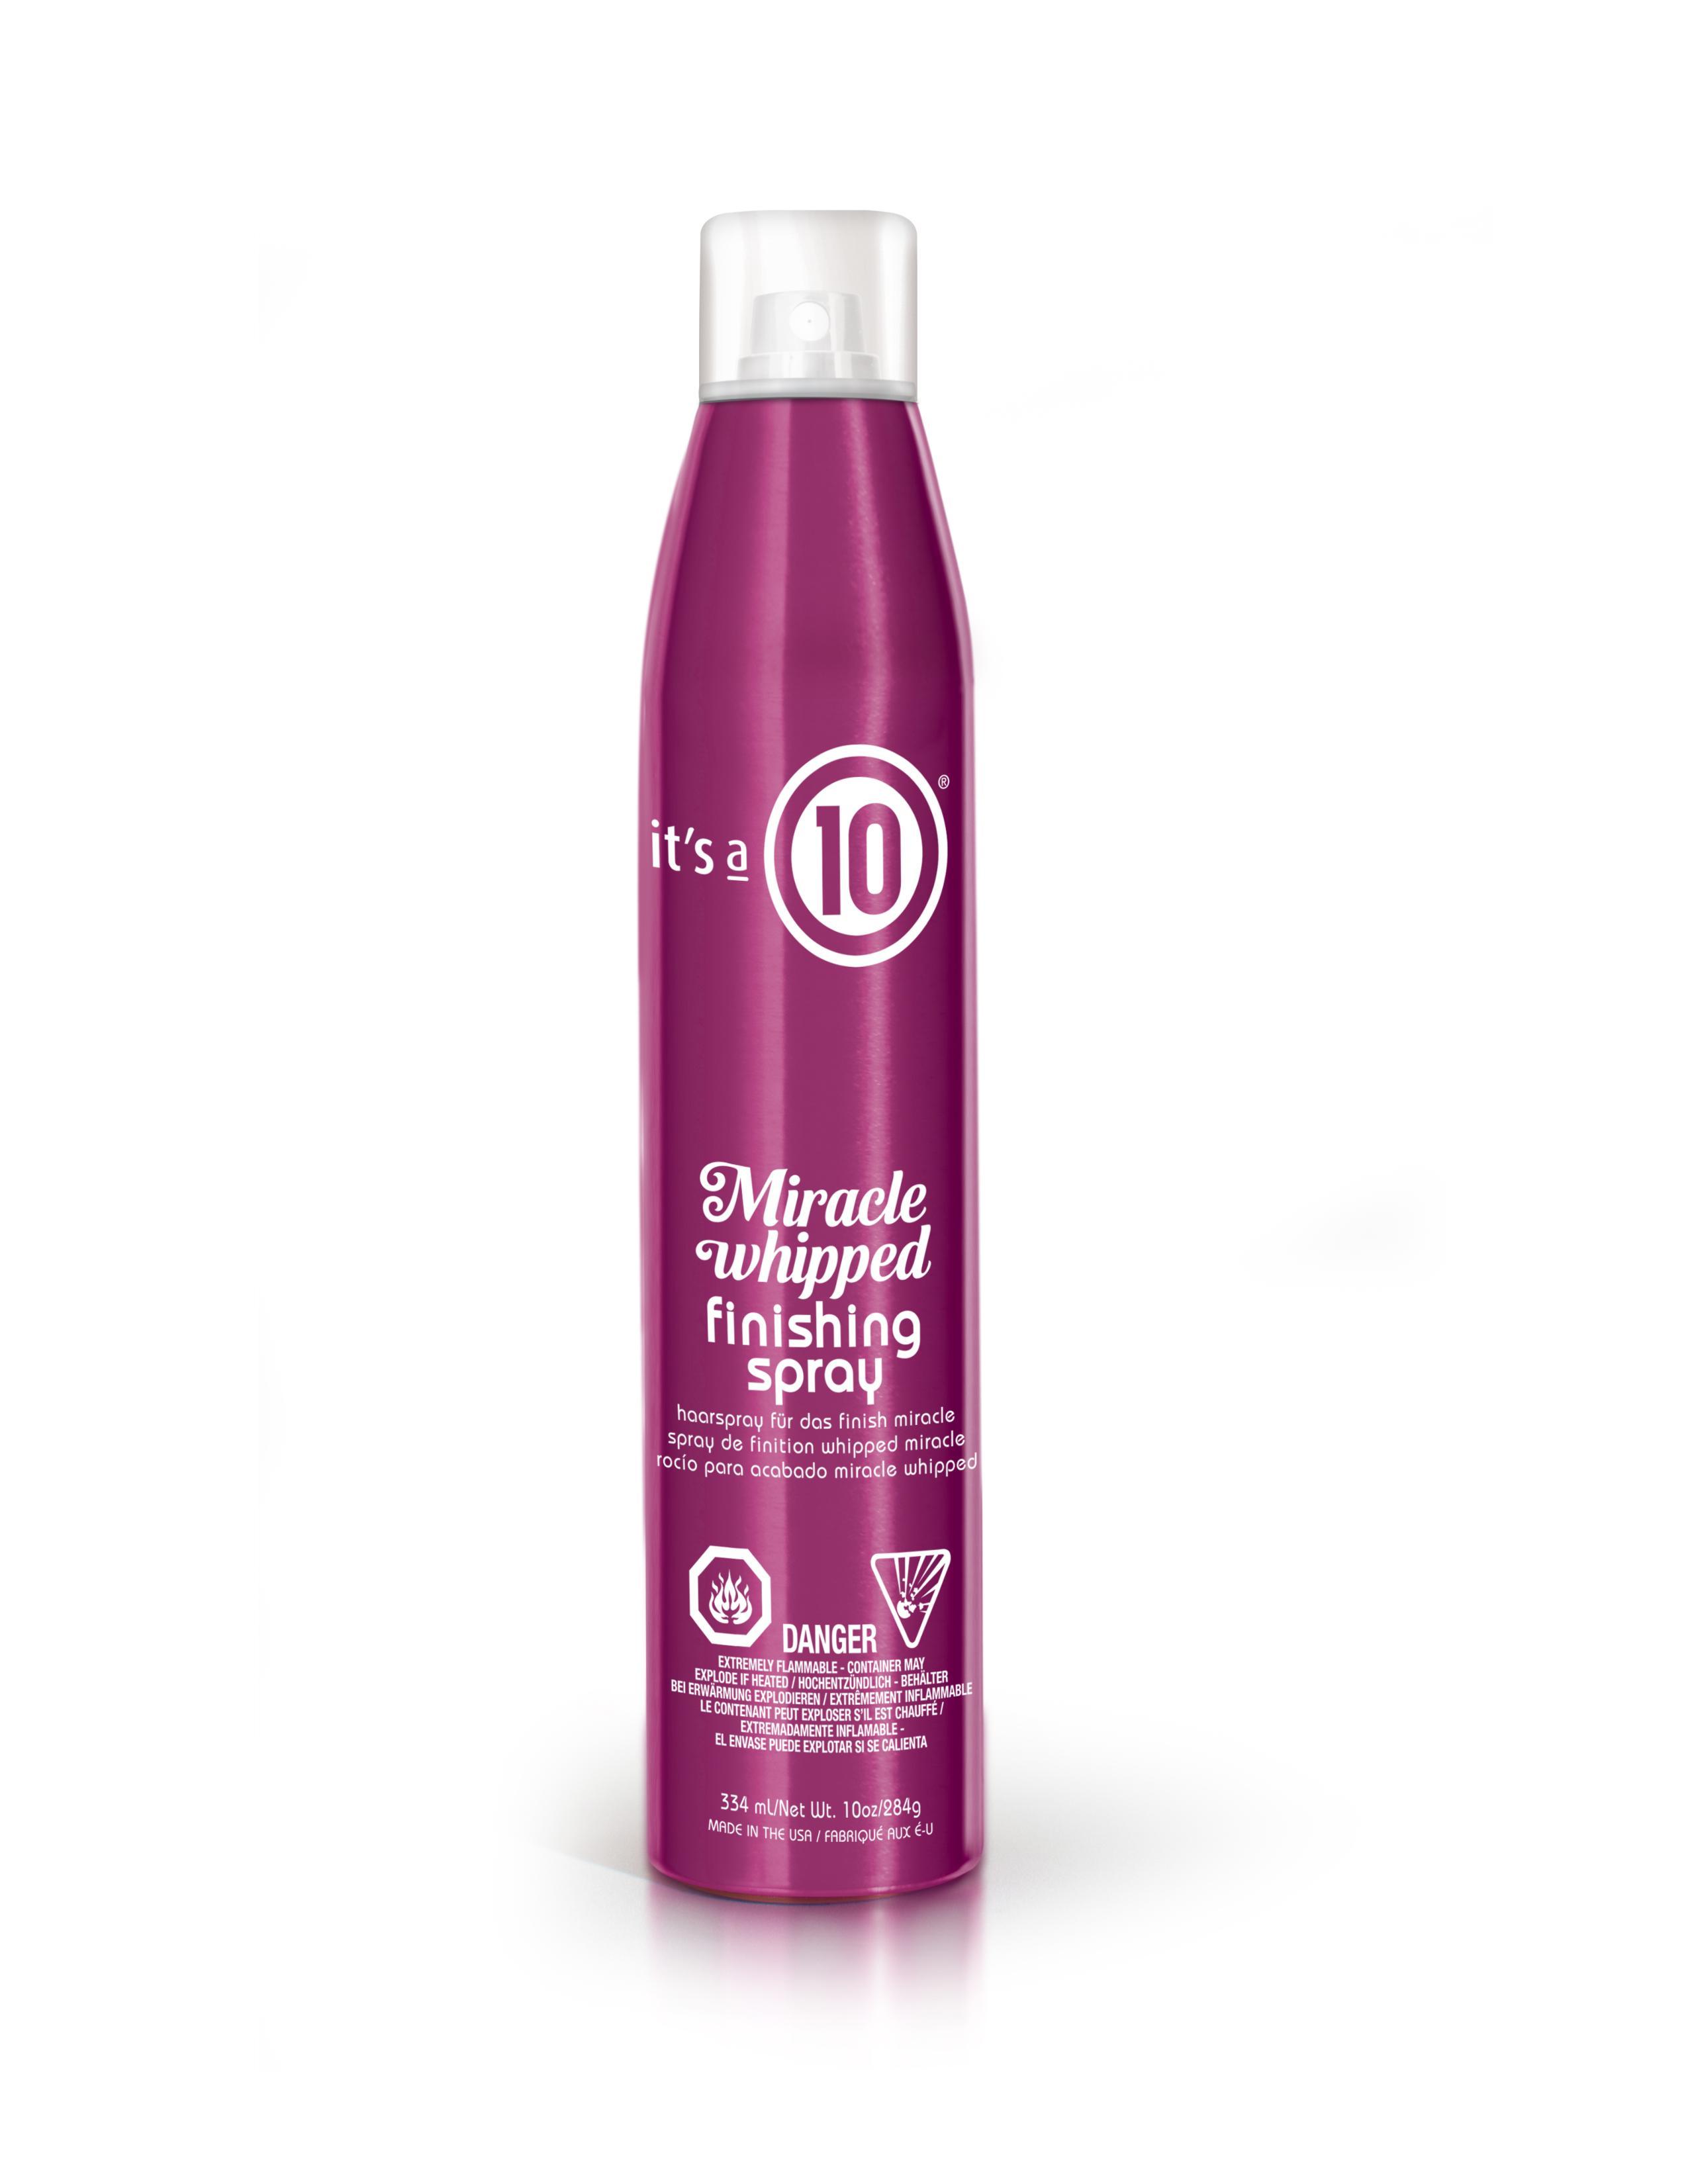 miracle 10 hair products